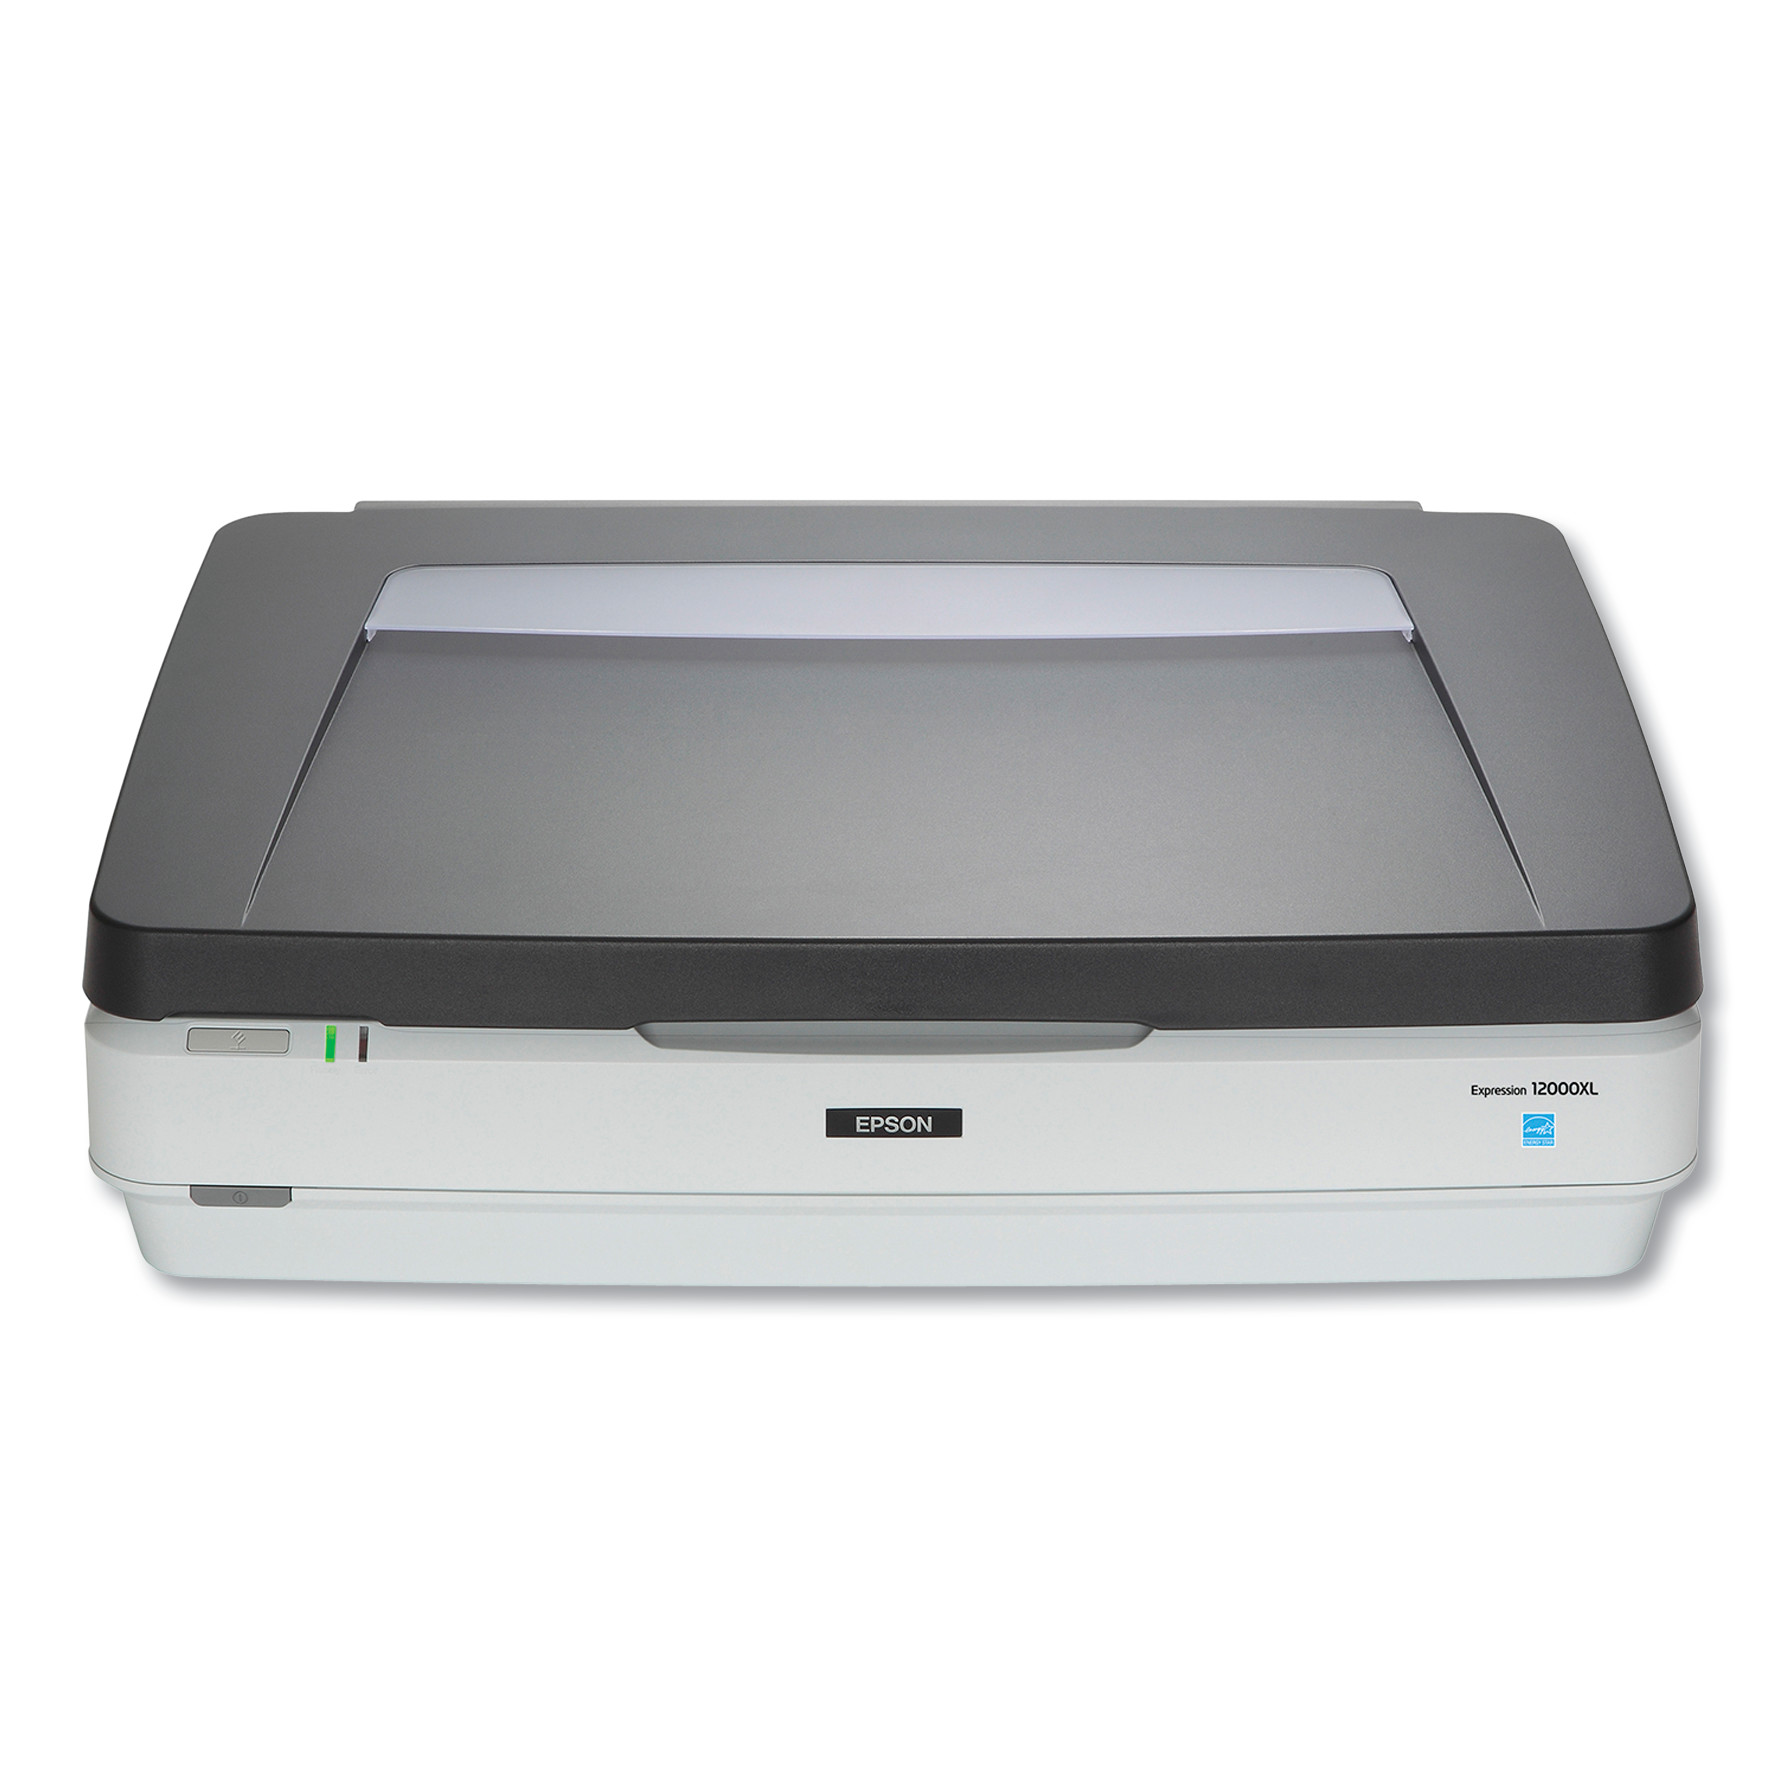  Epson 12000XLPH Expression 12000XL Photo Scanner, Scan Up to 12.2 x 17.2, 2400 dpi Optical Resolution (EPS12000XLPH) 